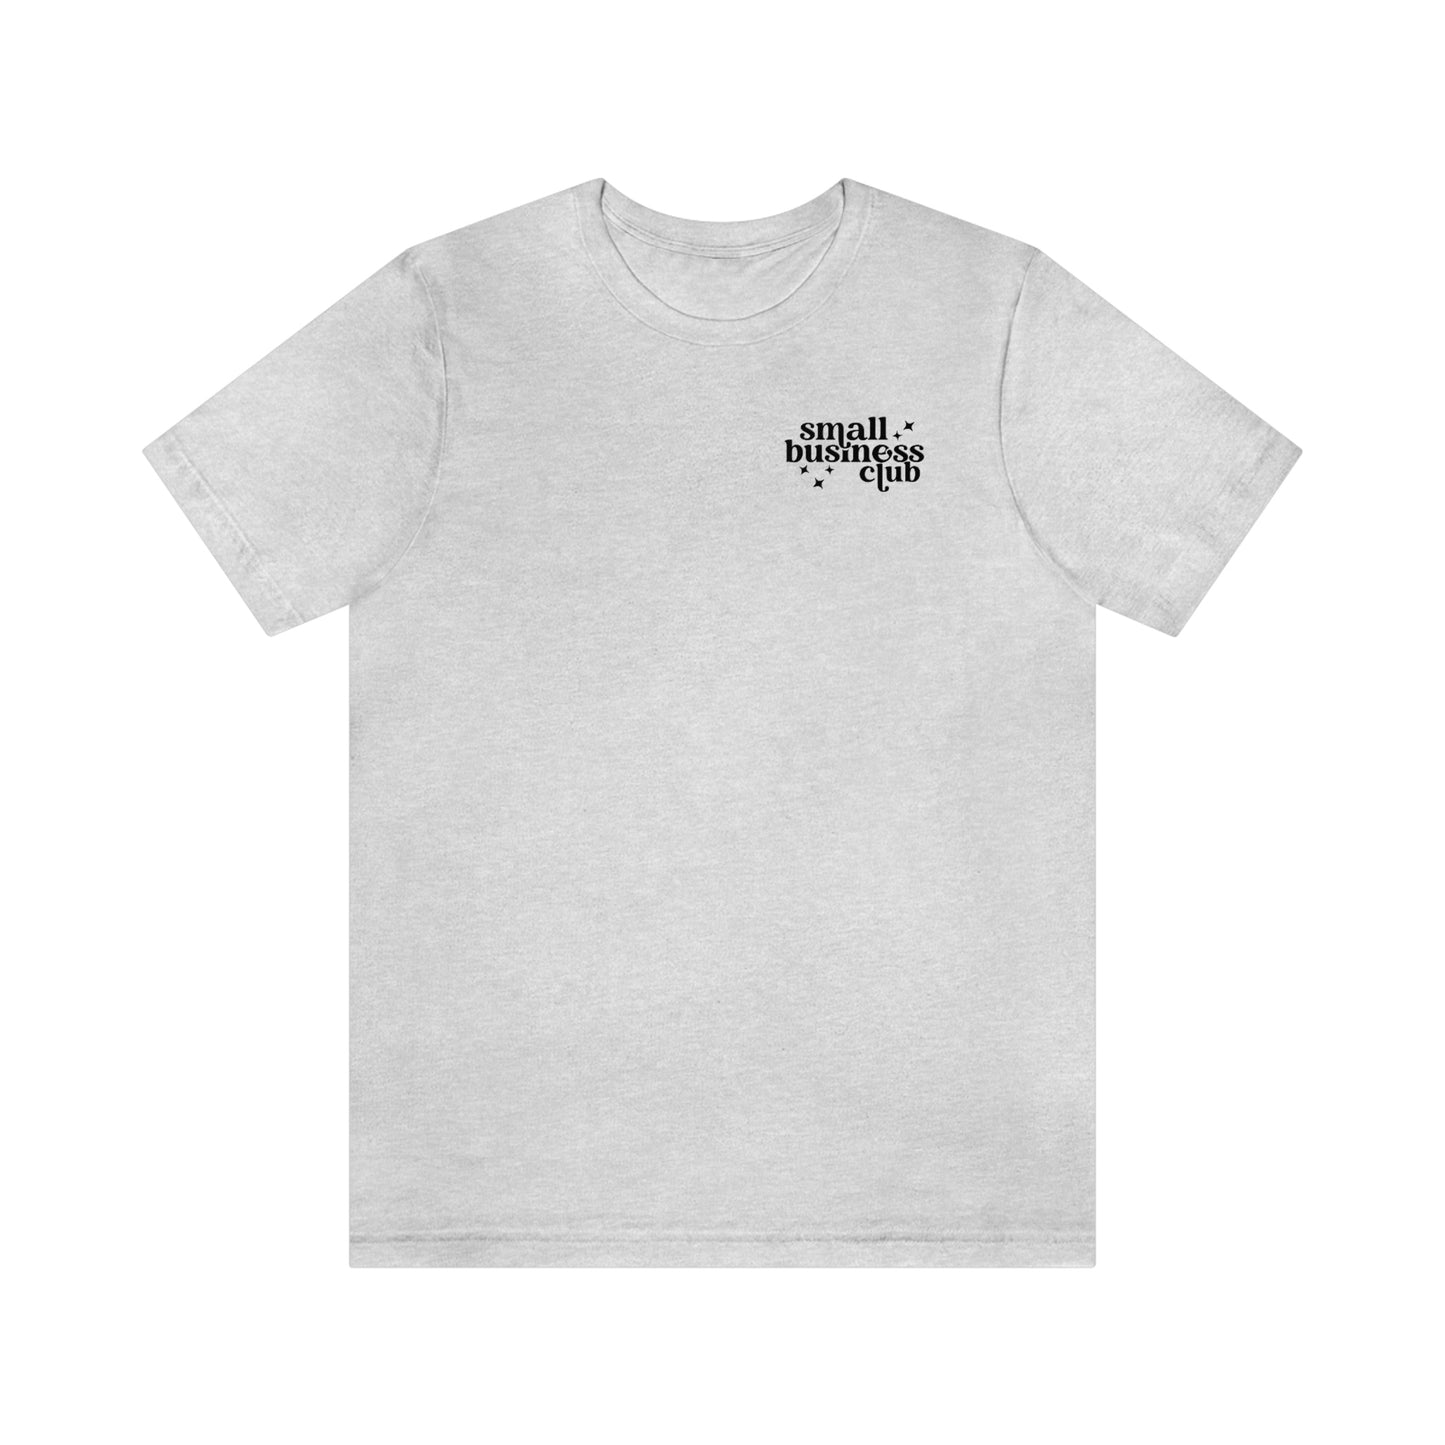 Small Business Club - Maker Tee